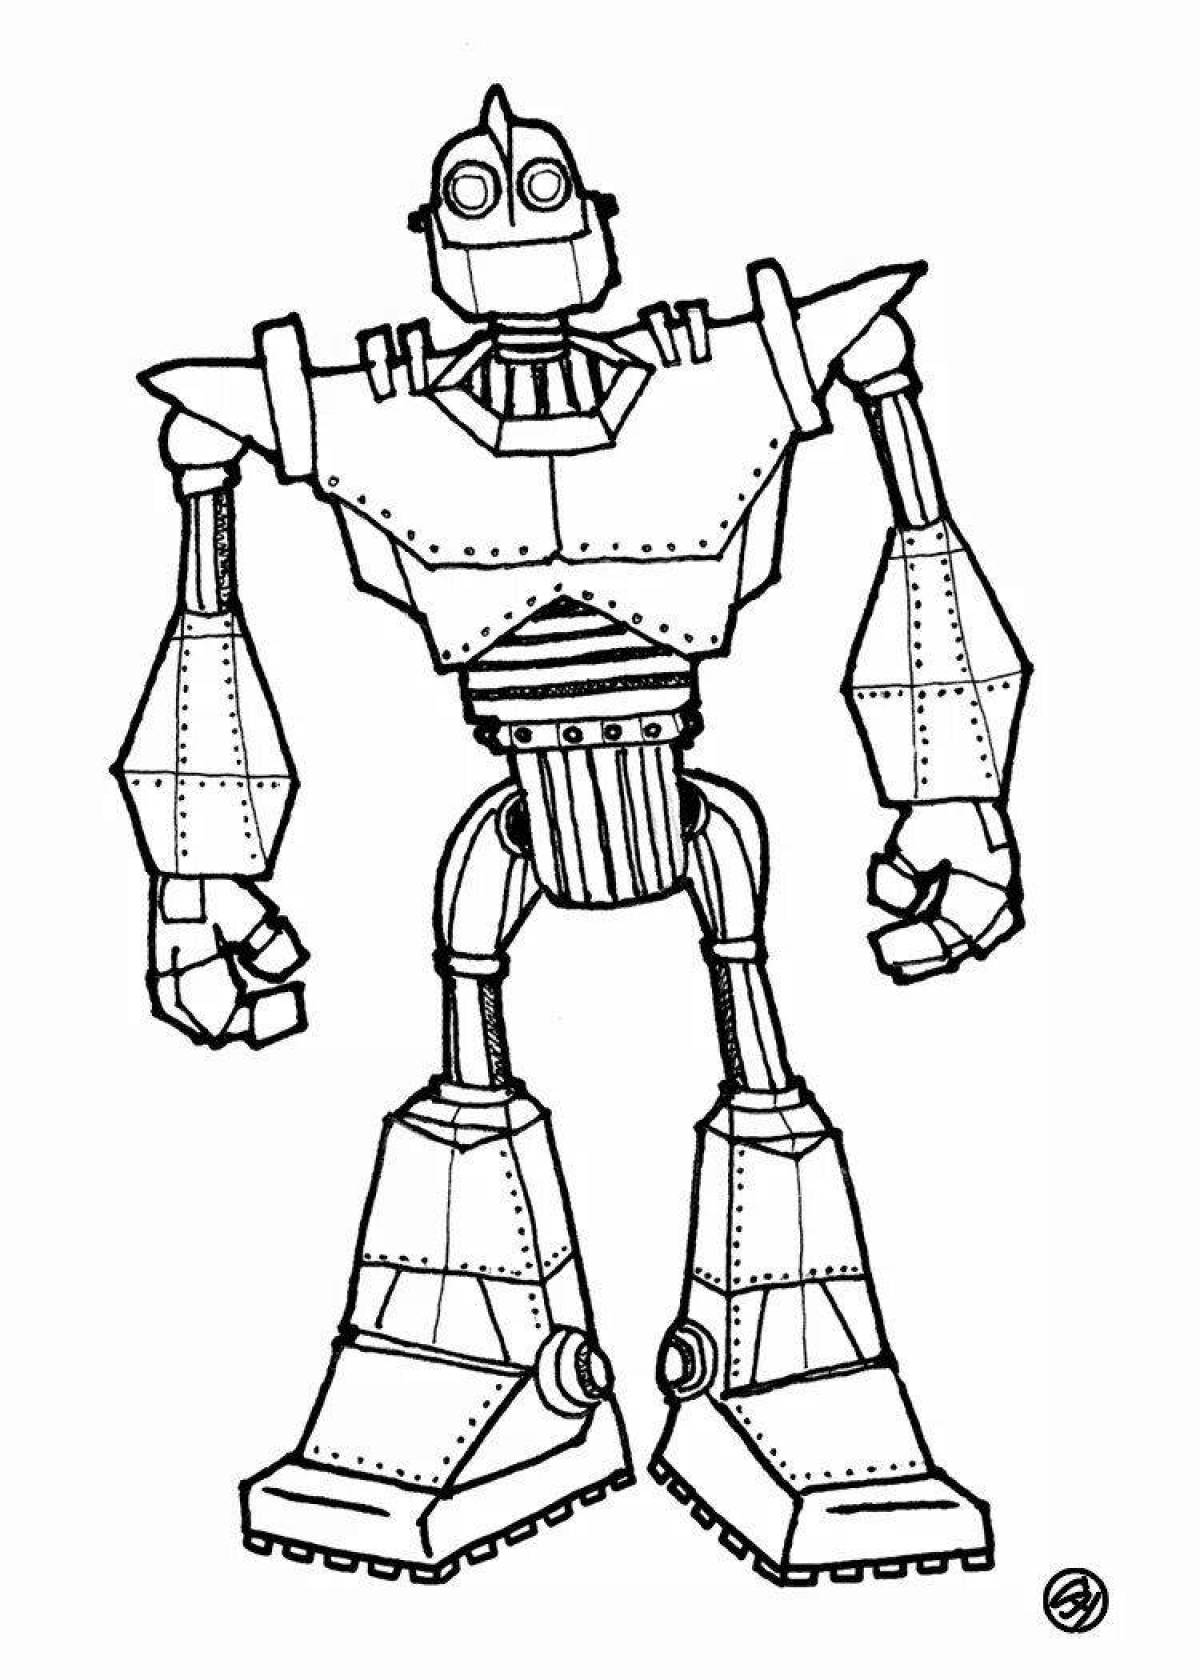 Incredible robot coloring pages for boys 5-6 years old